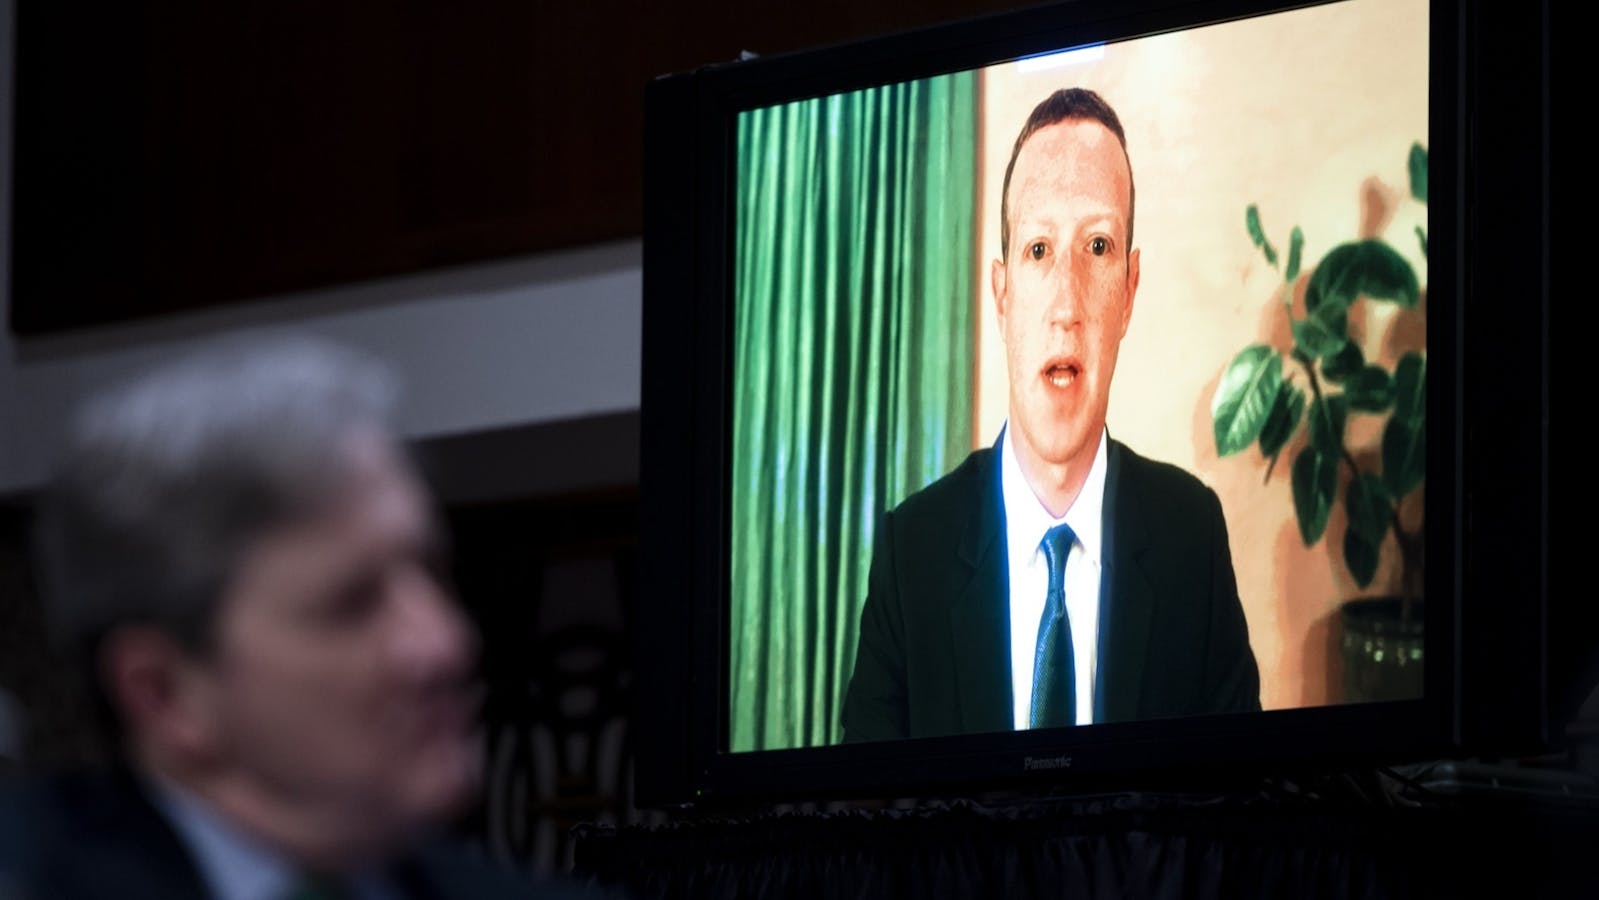 Facebook CEO Mark Zuckerberg speaks remotely during a Senate Judiciary Committee hearing in Washington, D.C., U.S., on Tuesday, Nov. 18, 2020. Photo: Bloomberg